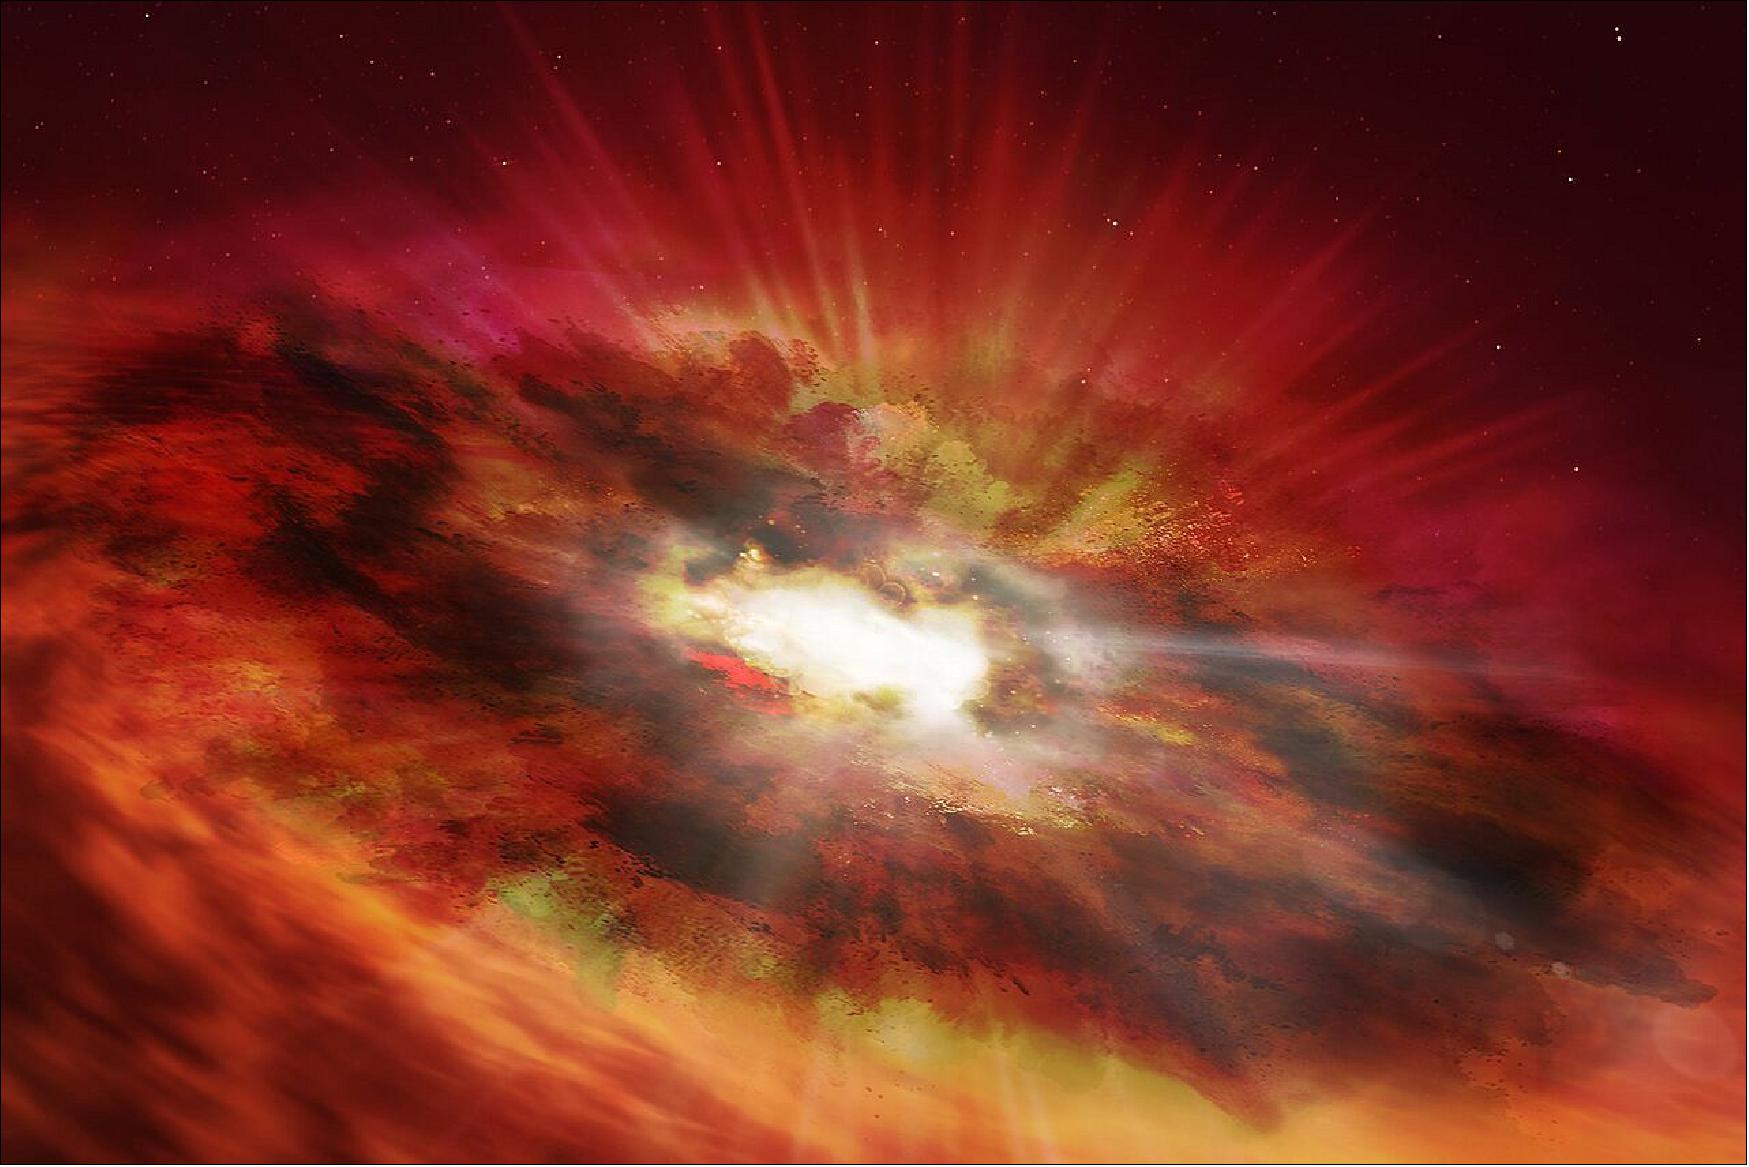 Figure 54: Artist’s impression of GNz7q. Current theories predict that supermassive black holes begin their lives in the dust-shrouded cores of vigorously star-forming “starburst” galaxies before expelling the surrounding gas and dust and emerging as extremely luminous quasars. Whilst they are extremely rare, examples of both dusty starburst galaxies and luminous quasars have been detected in the early Universe. The team believes that GNz7q could be the “missing link” between these two classes of objects (image credit: ESA/Hubble, N. Bartmann)